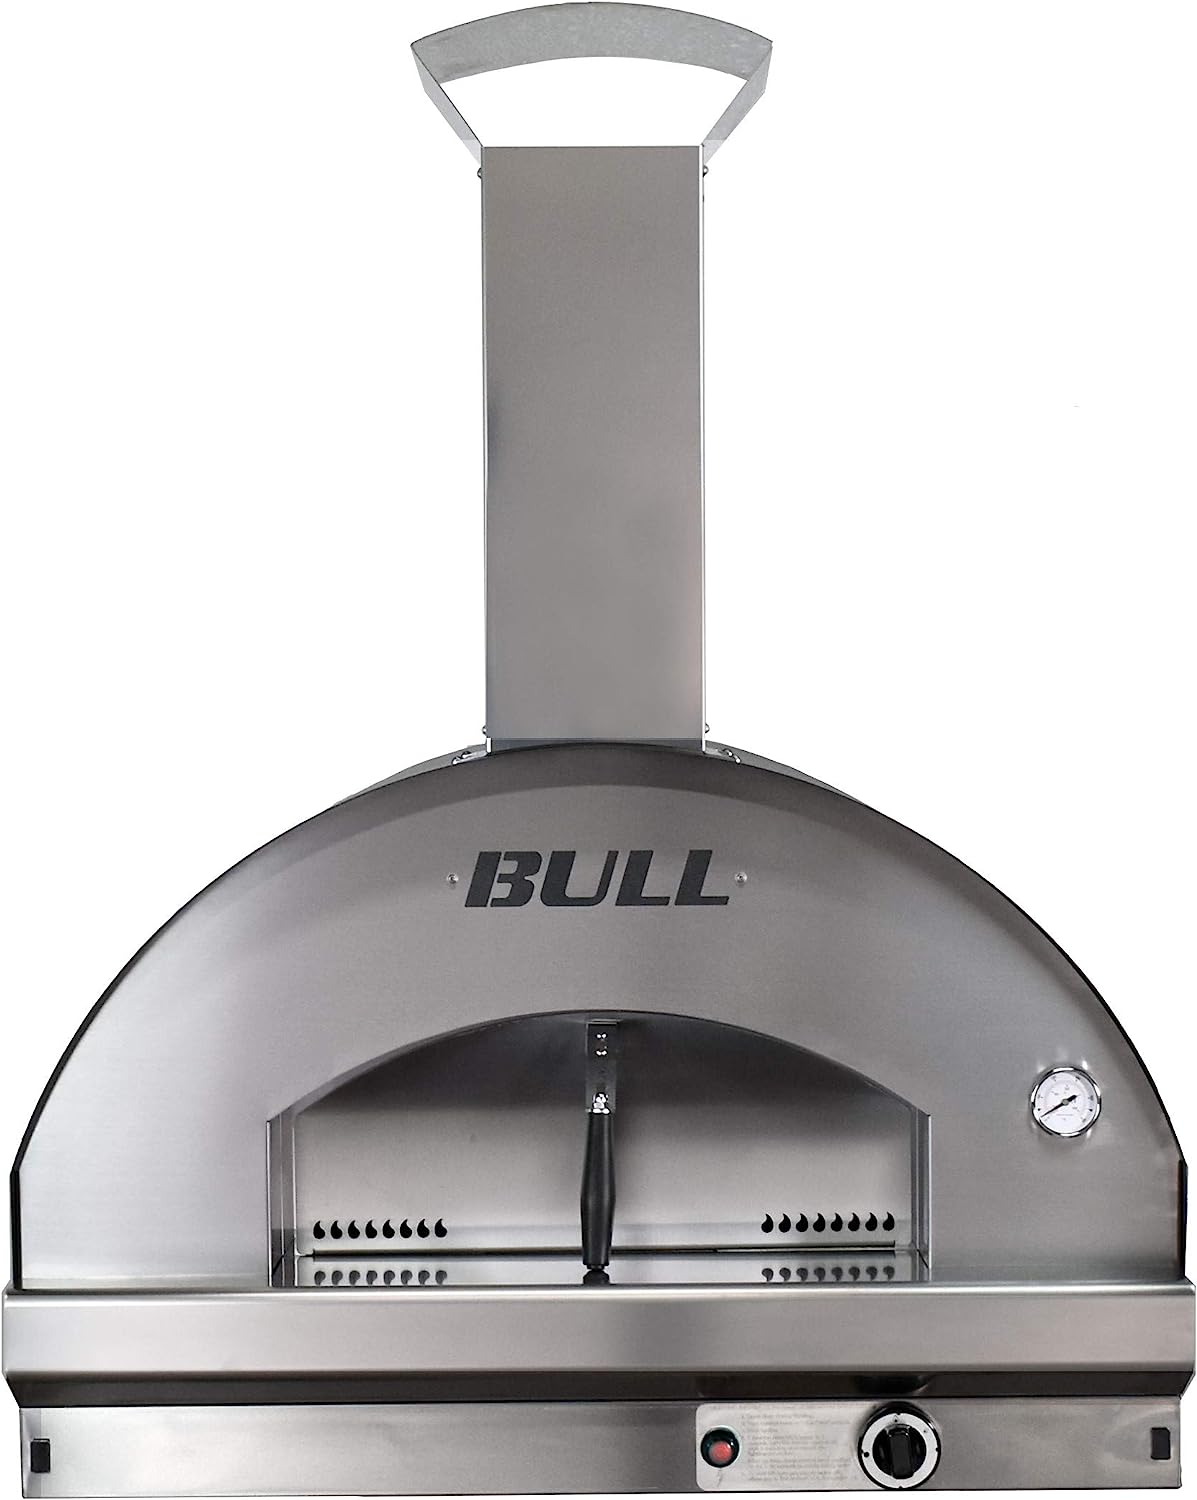 Bull Gas Fired Italian Made Pizza Oven Head- 77650